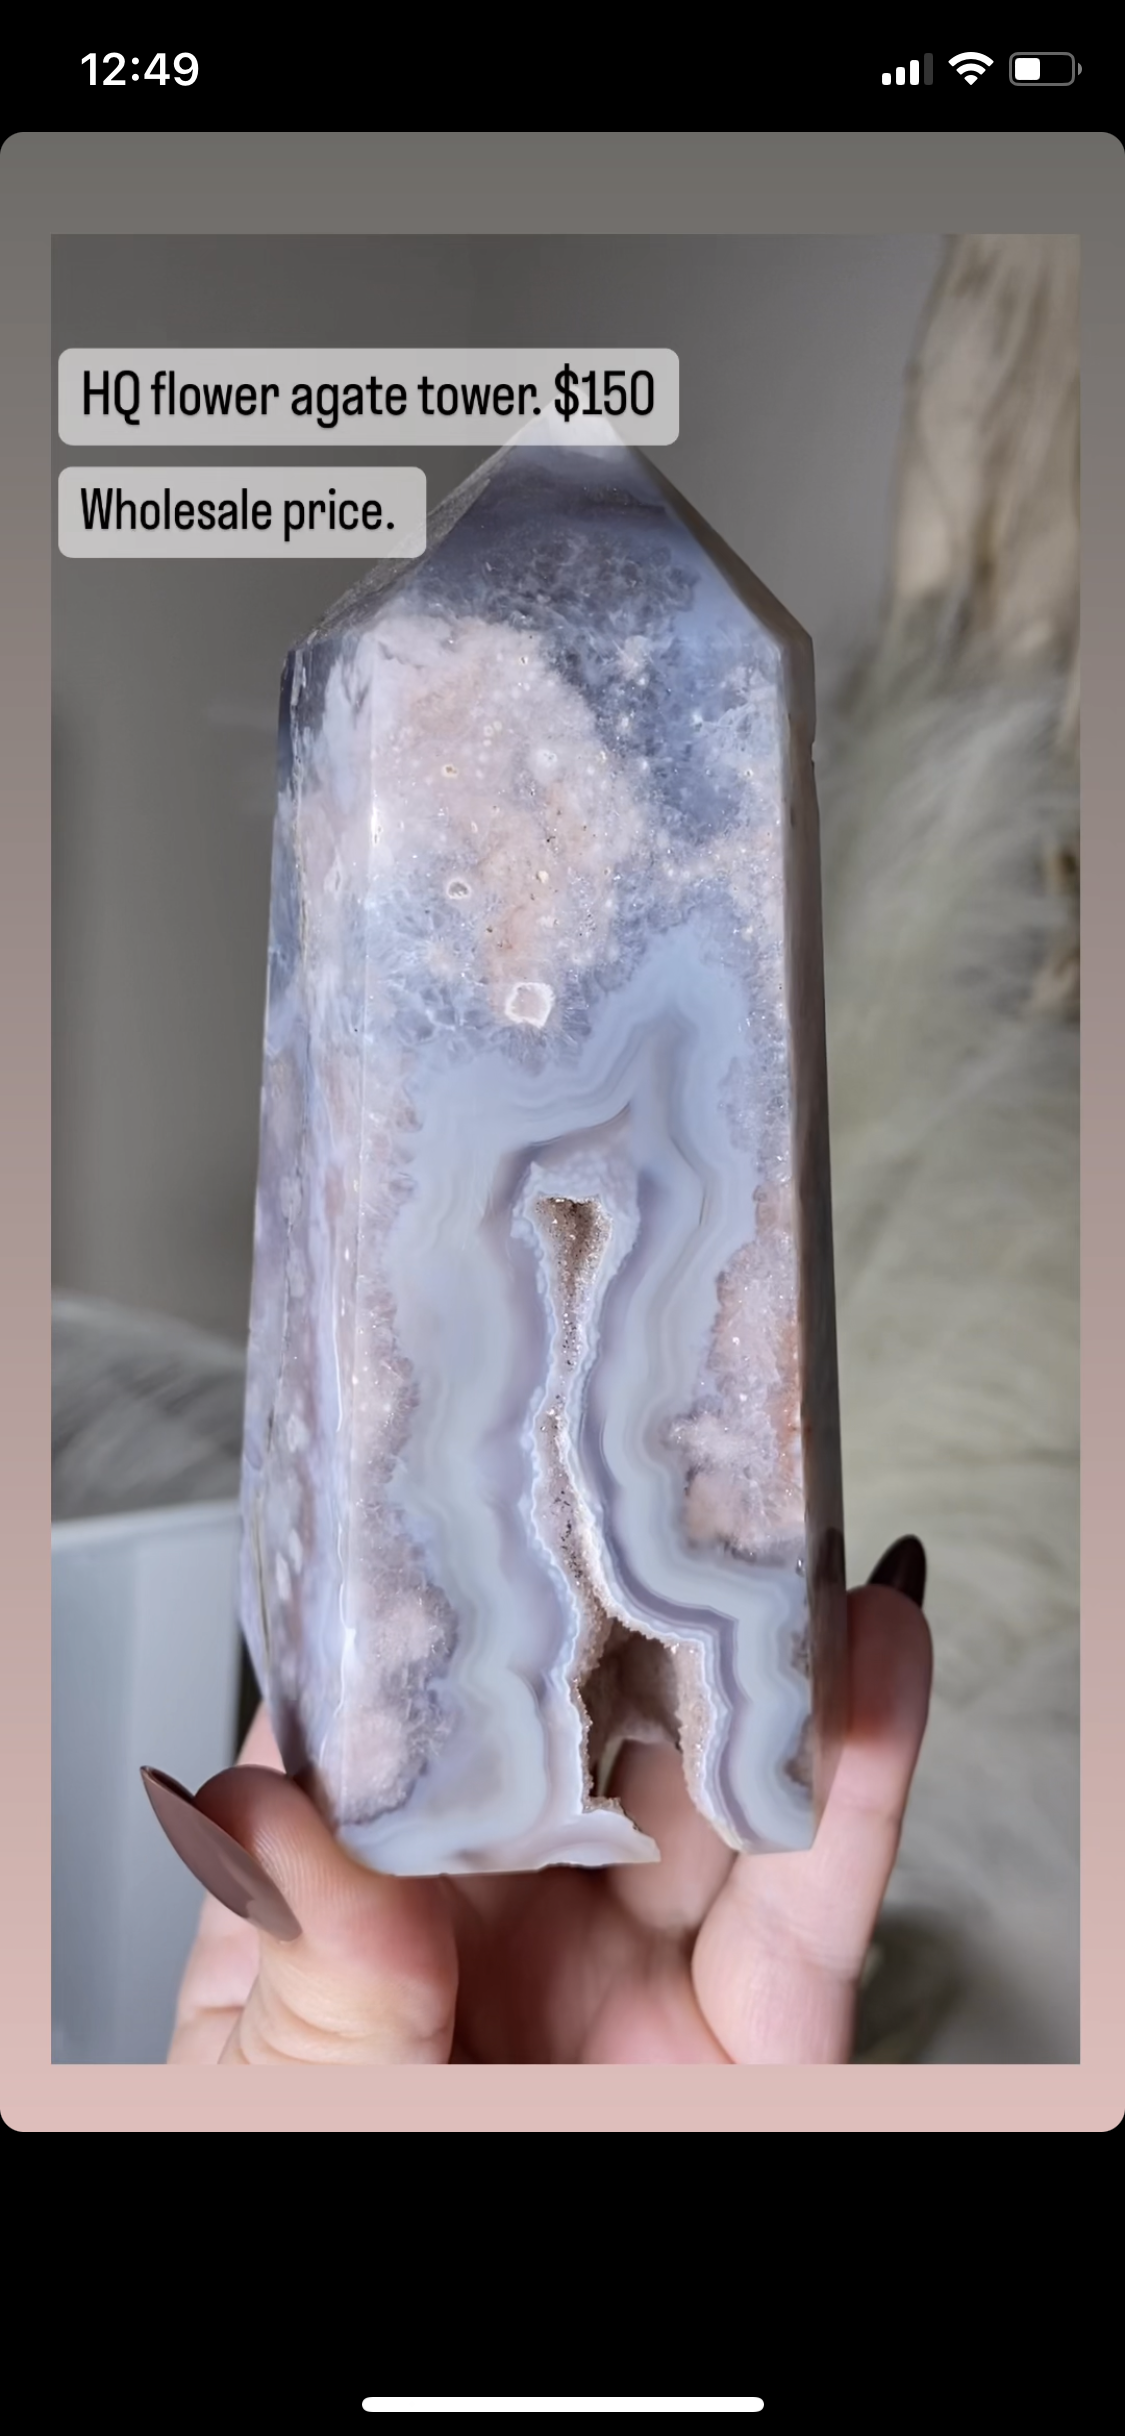 High quality flower agate tower.